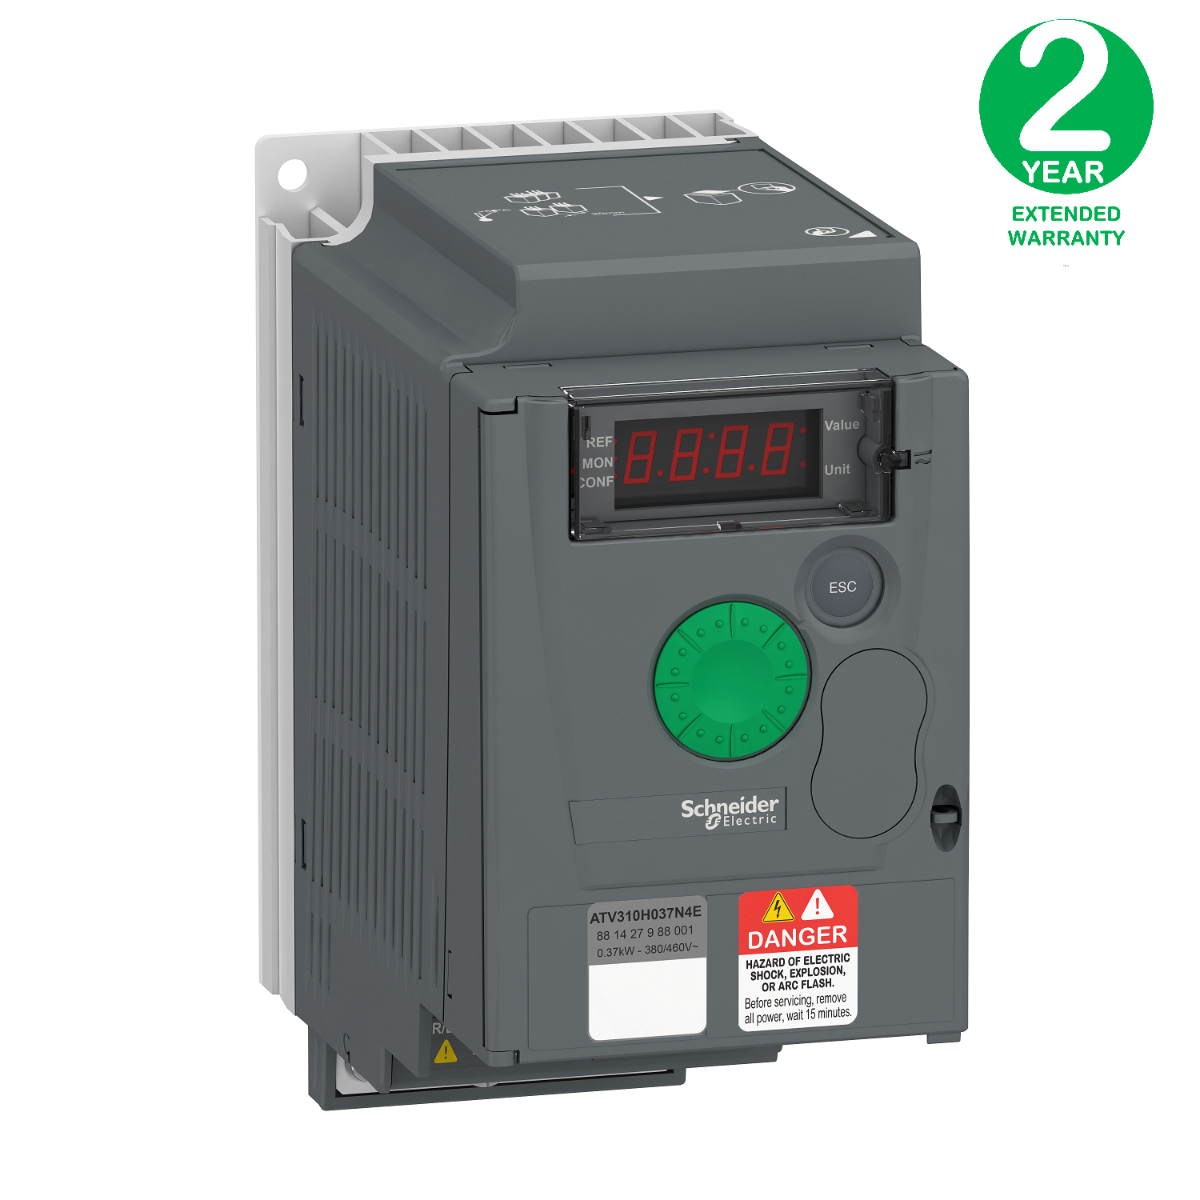 variable speed drive ATV310, 0.37 kW, 0.5 hp, 380...460 V, 3 phase, without filter + Extended Warranty 2 year